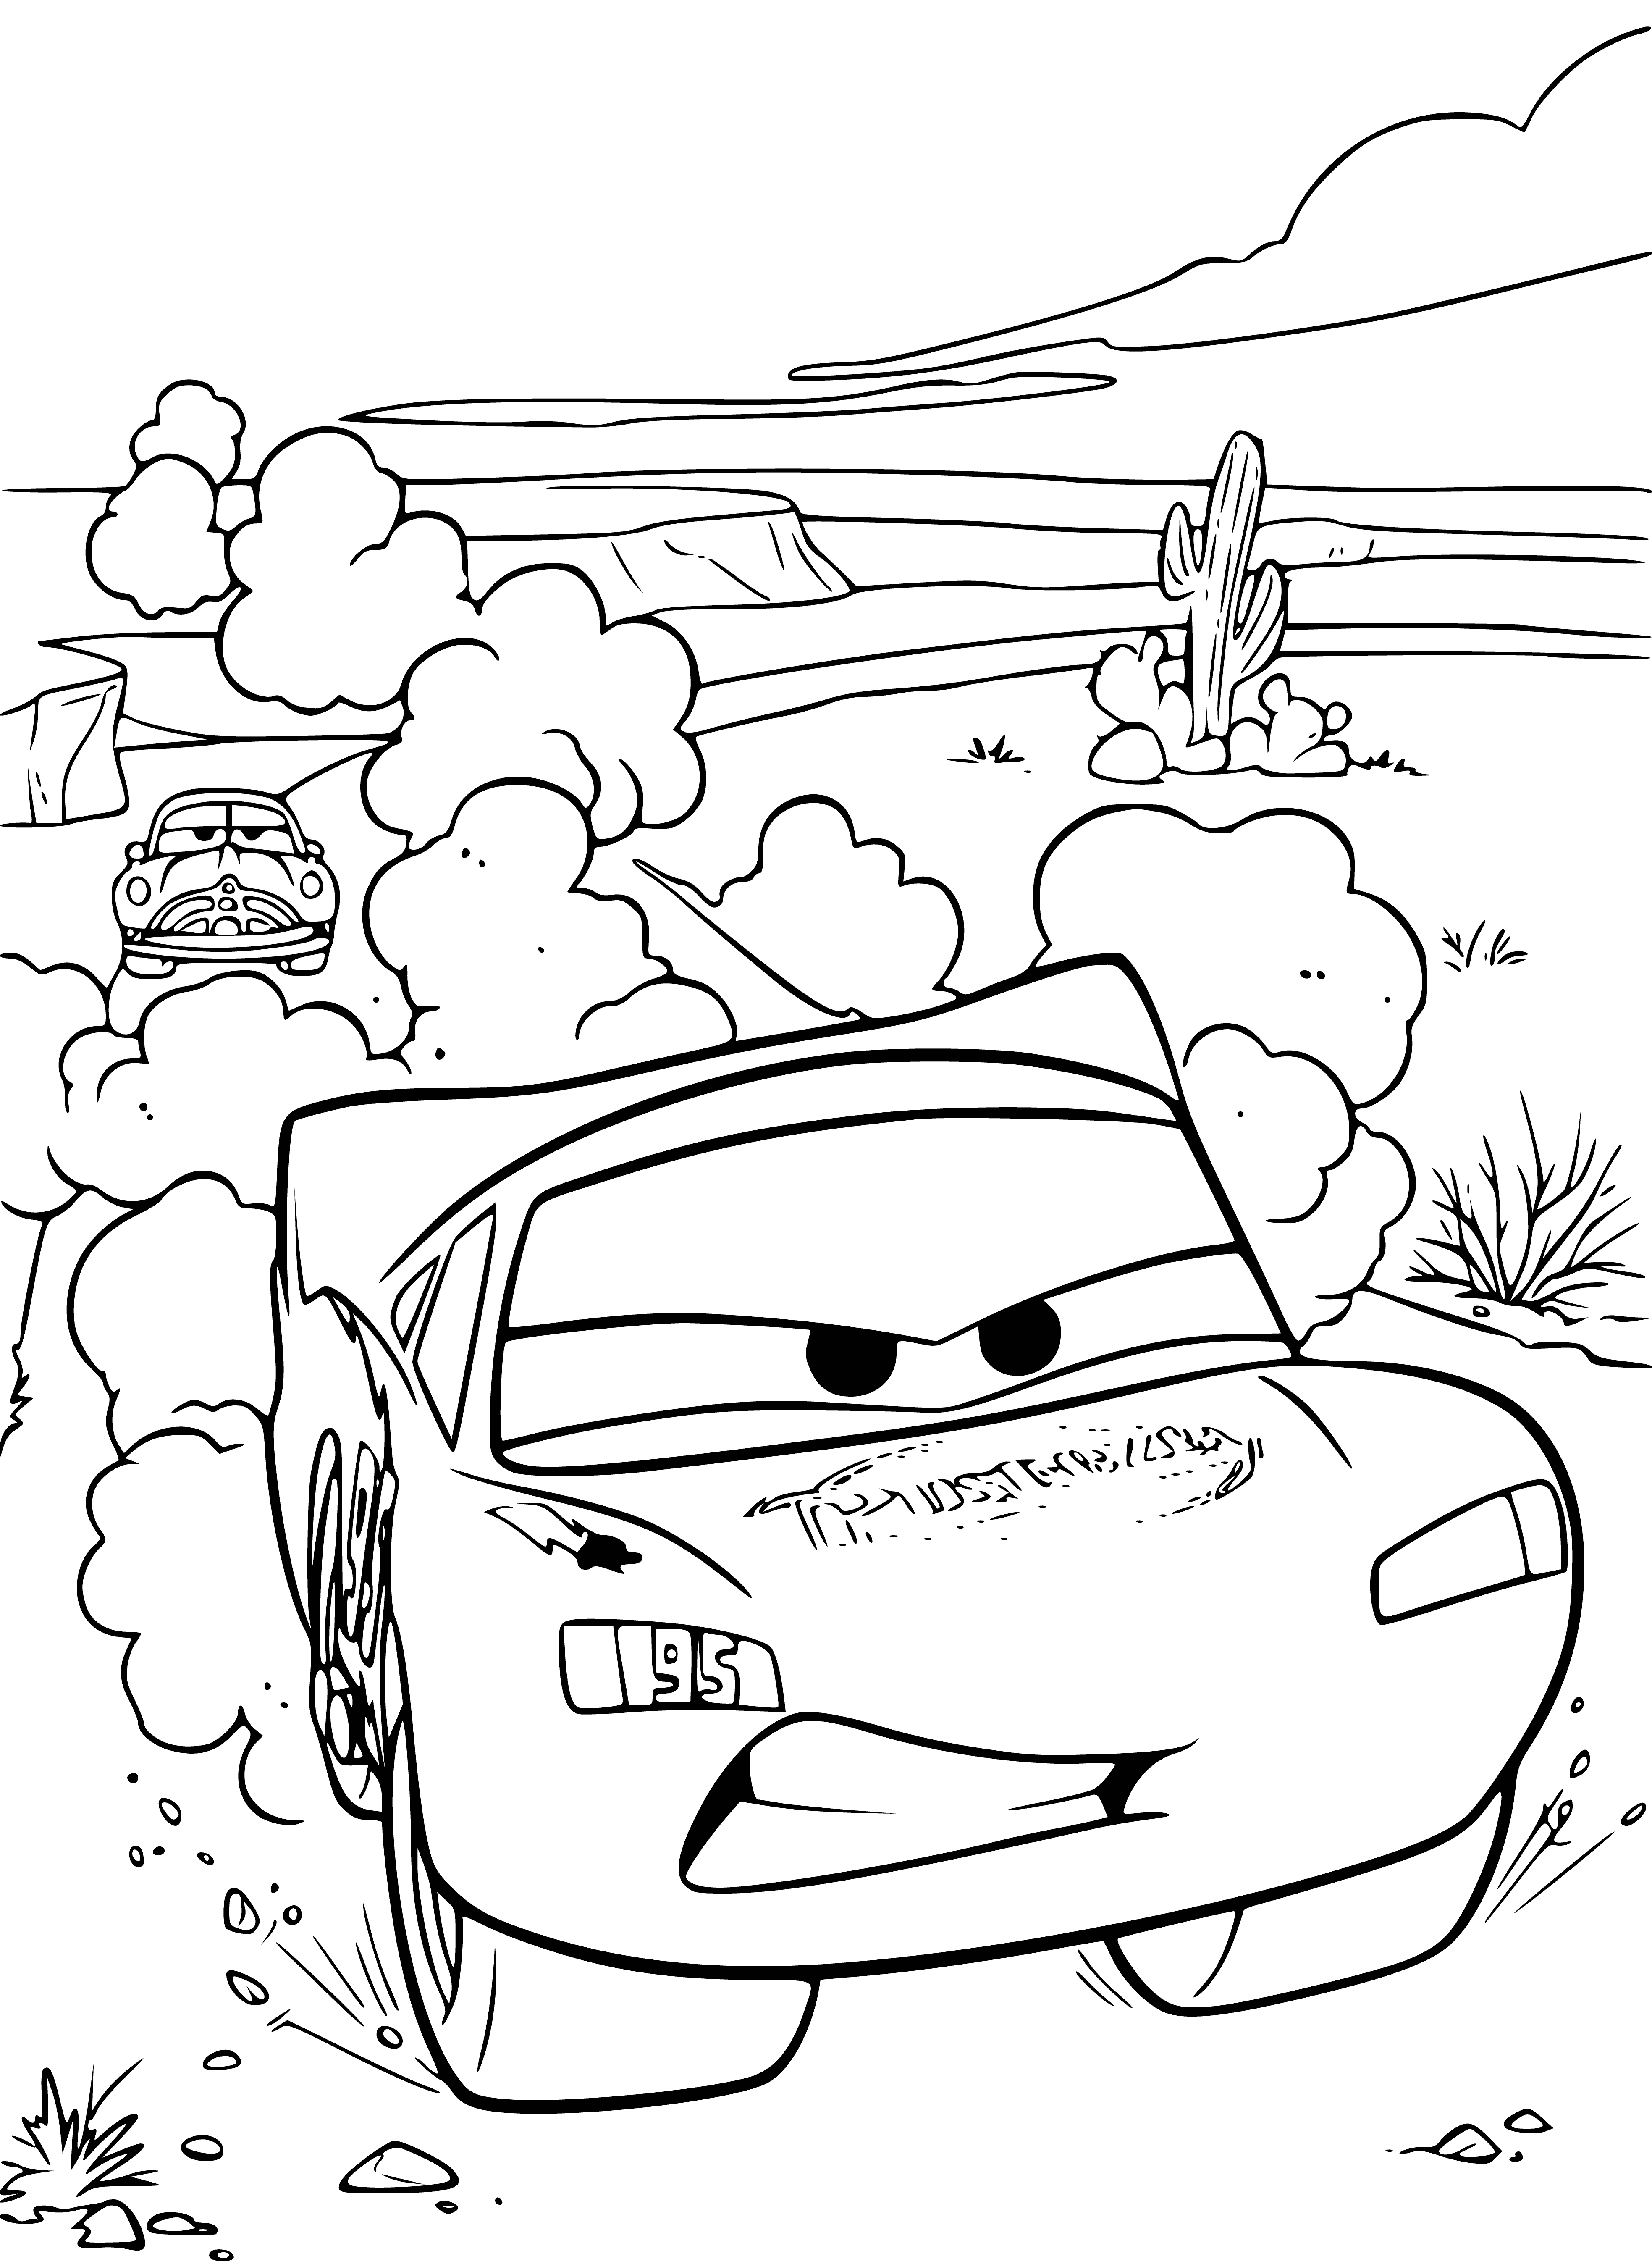 coloring page: Lightning McQueen racing with friends, happy to be hitting the roads! #Cars #Pixar #Cars3 #Disney